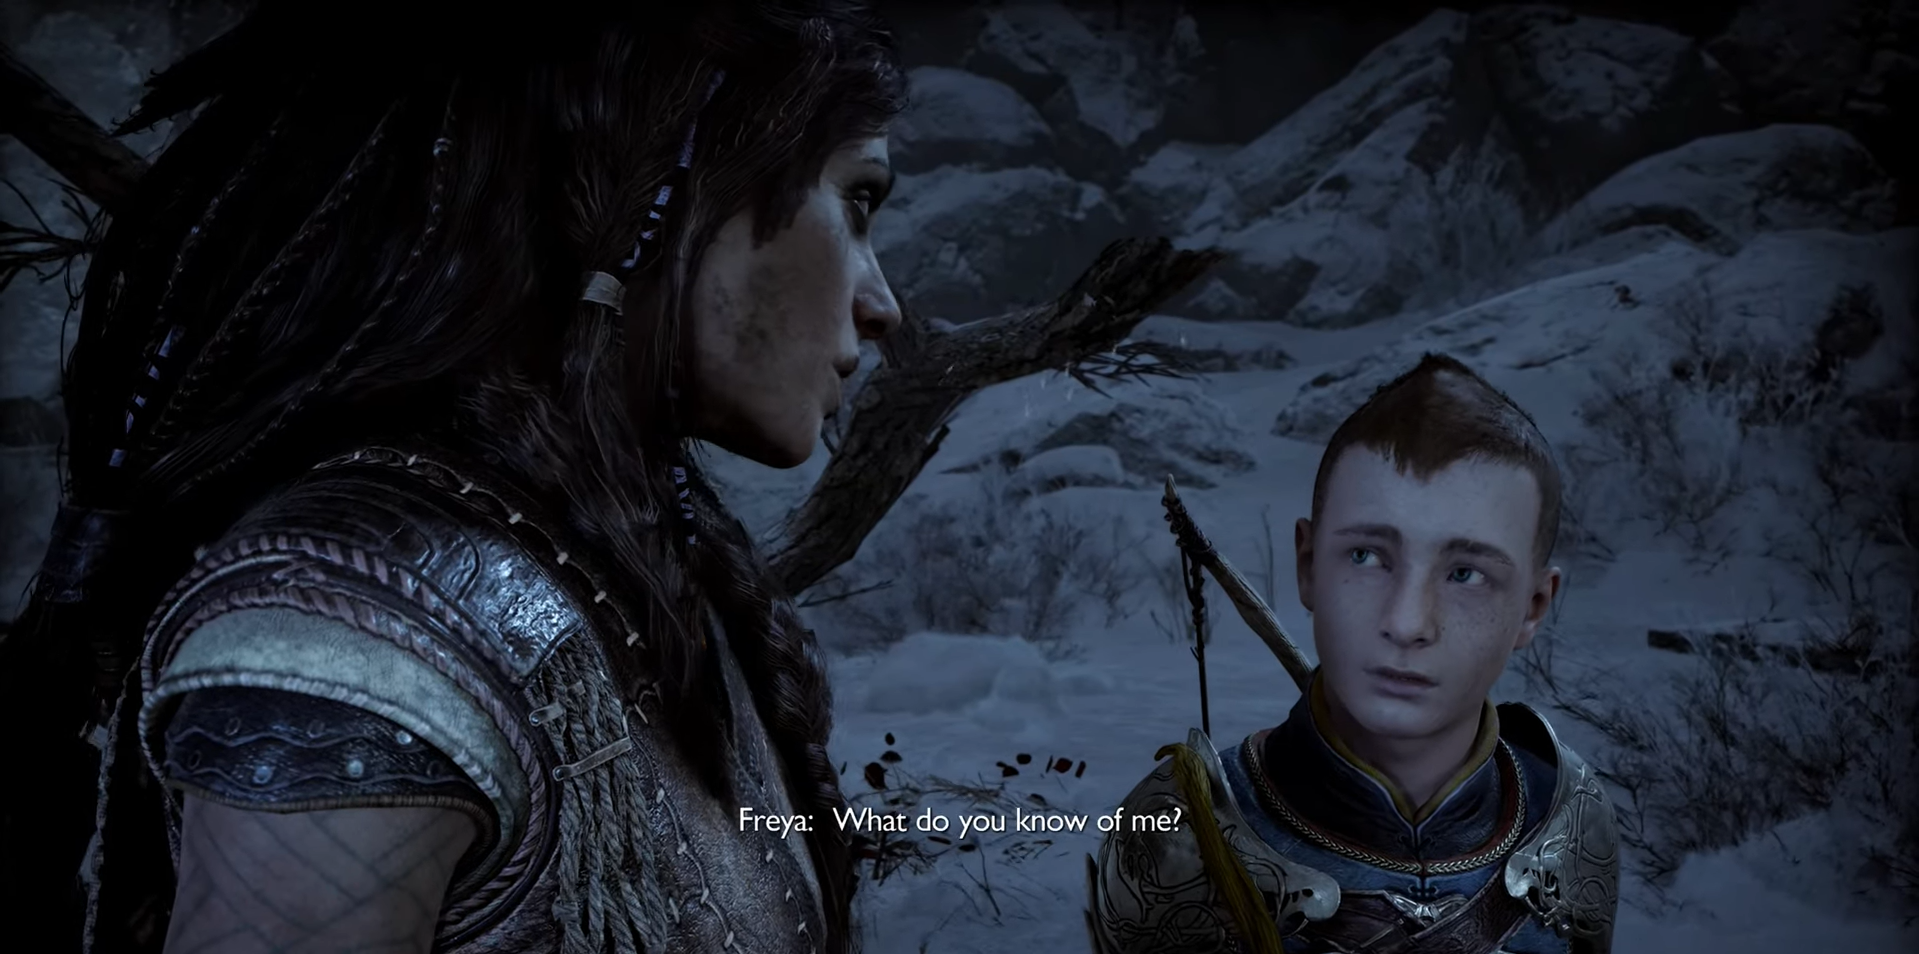 Screenshot of the game. Atreus looks at Freya, who says, "What do you know of me?"